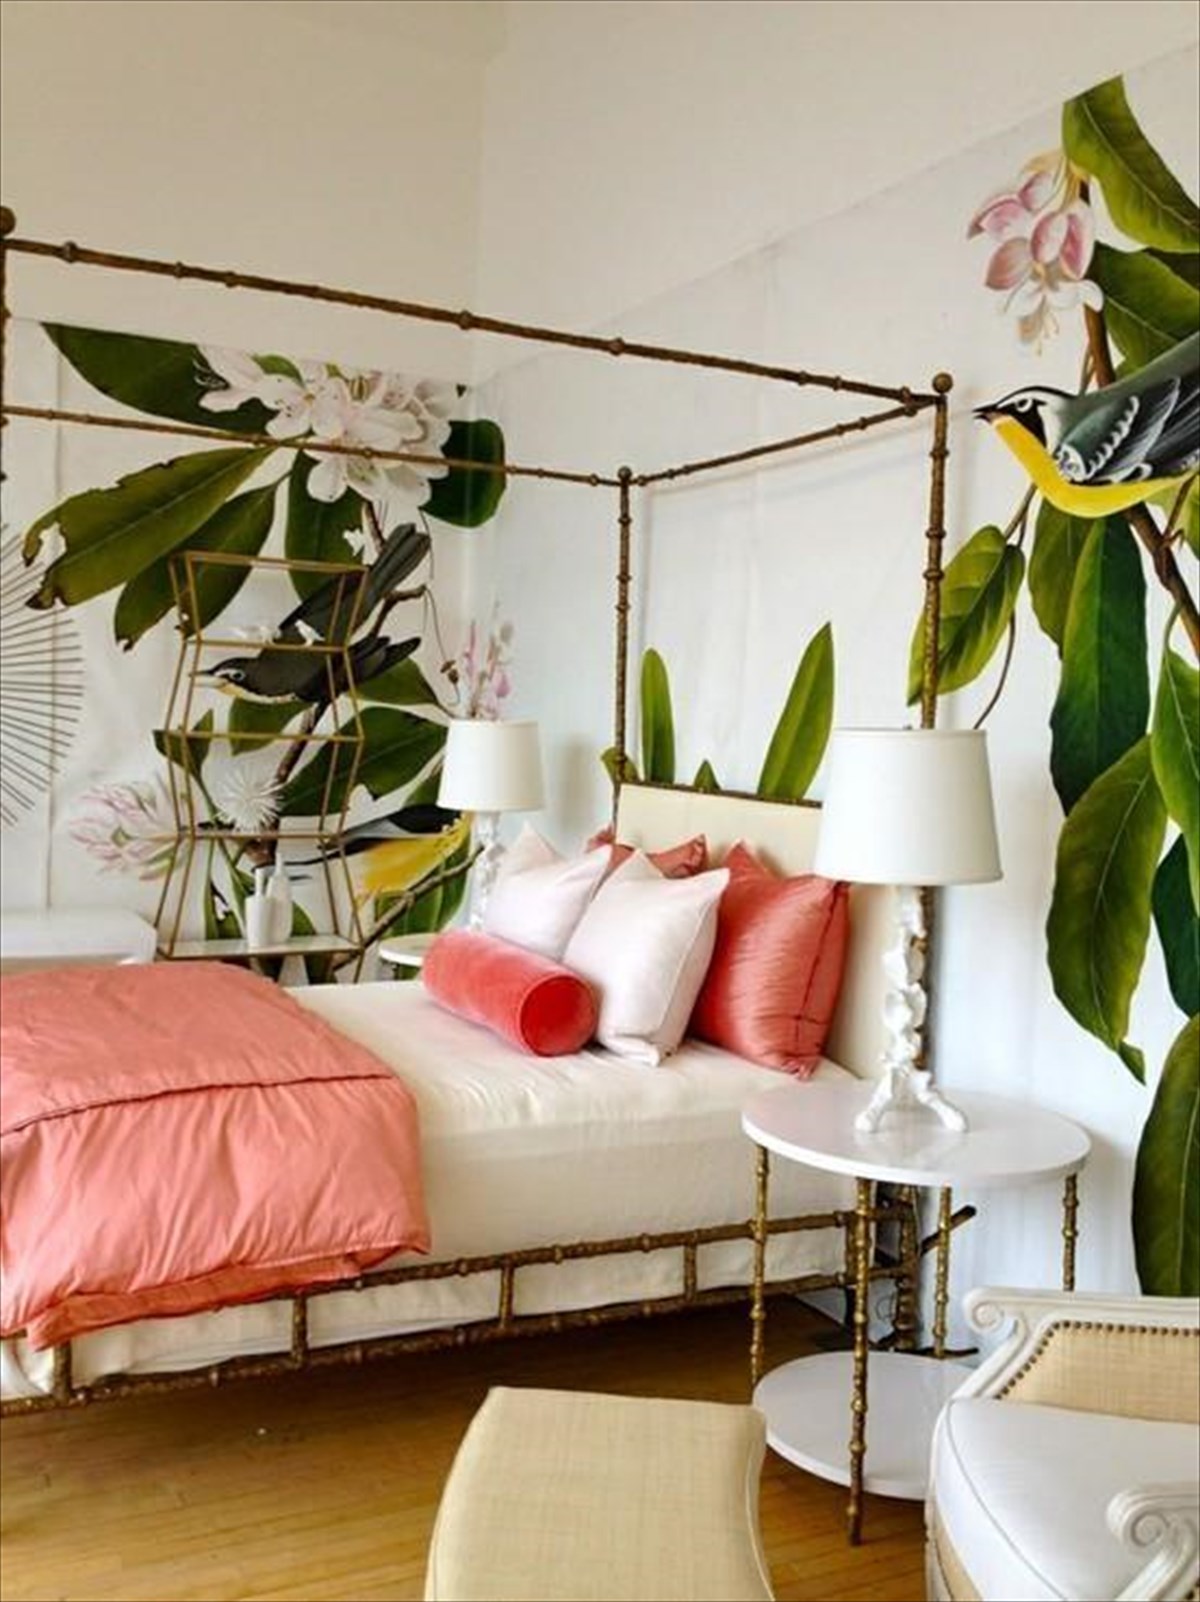 How To Do The Tropical Trend For Grown-ups - Tropical Bedroom Design Ideas - HD Wallpaper 